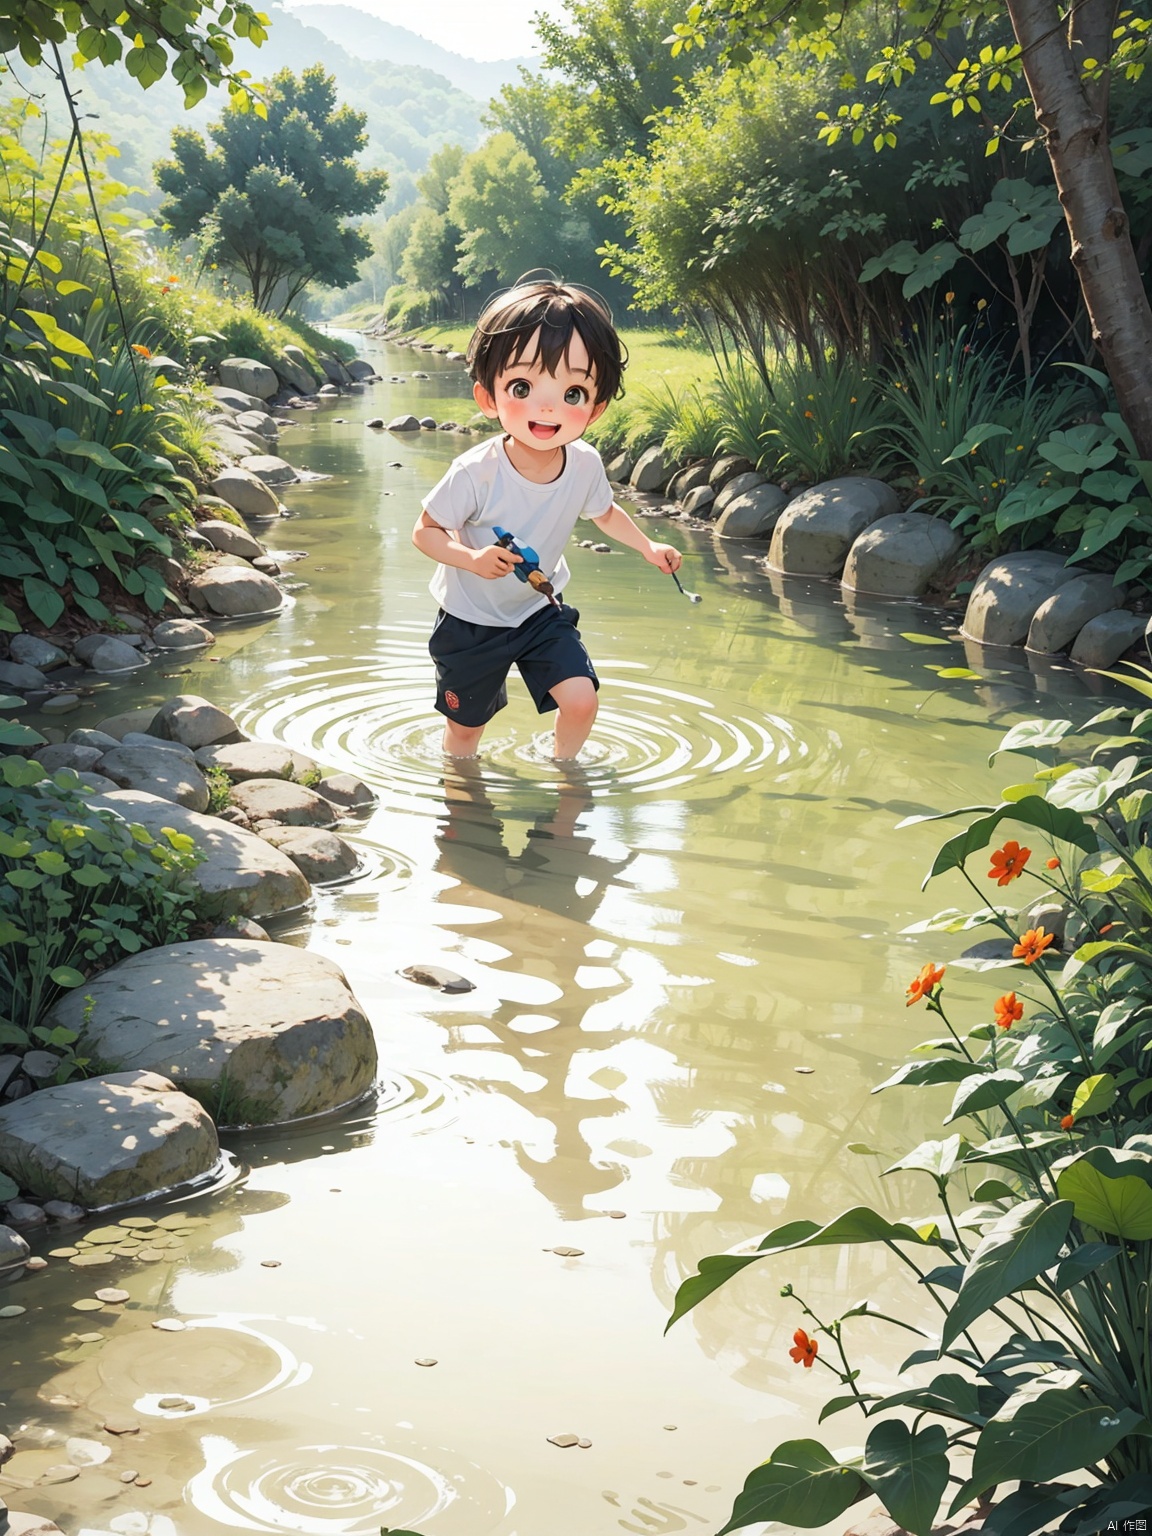 /imagine prompt: A little boy, happily playing in the water, in the clean and beautiful endless stream of the countryside,,, kid, Natural light, Medium Long Shot(MLS)